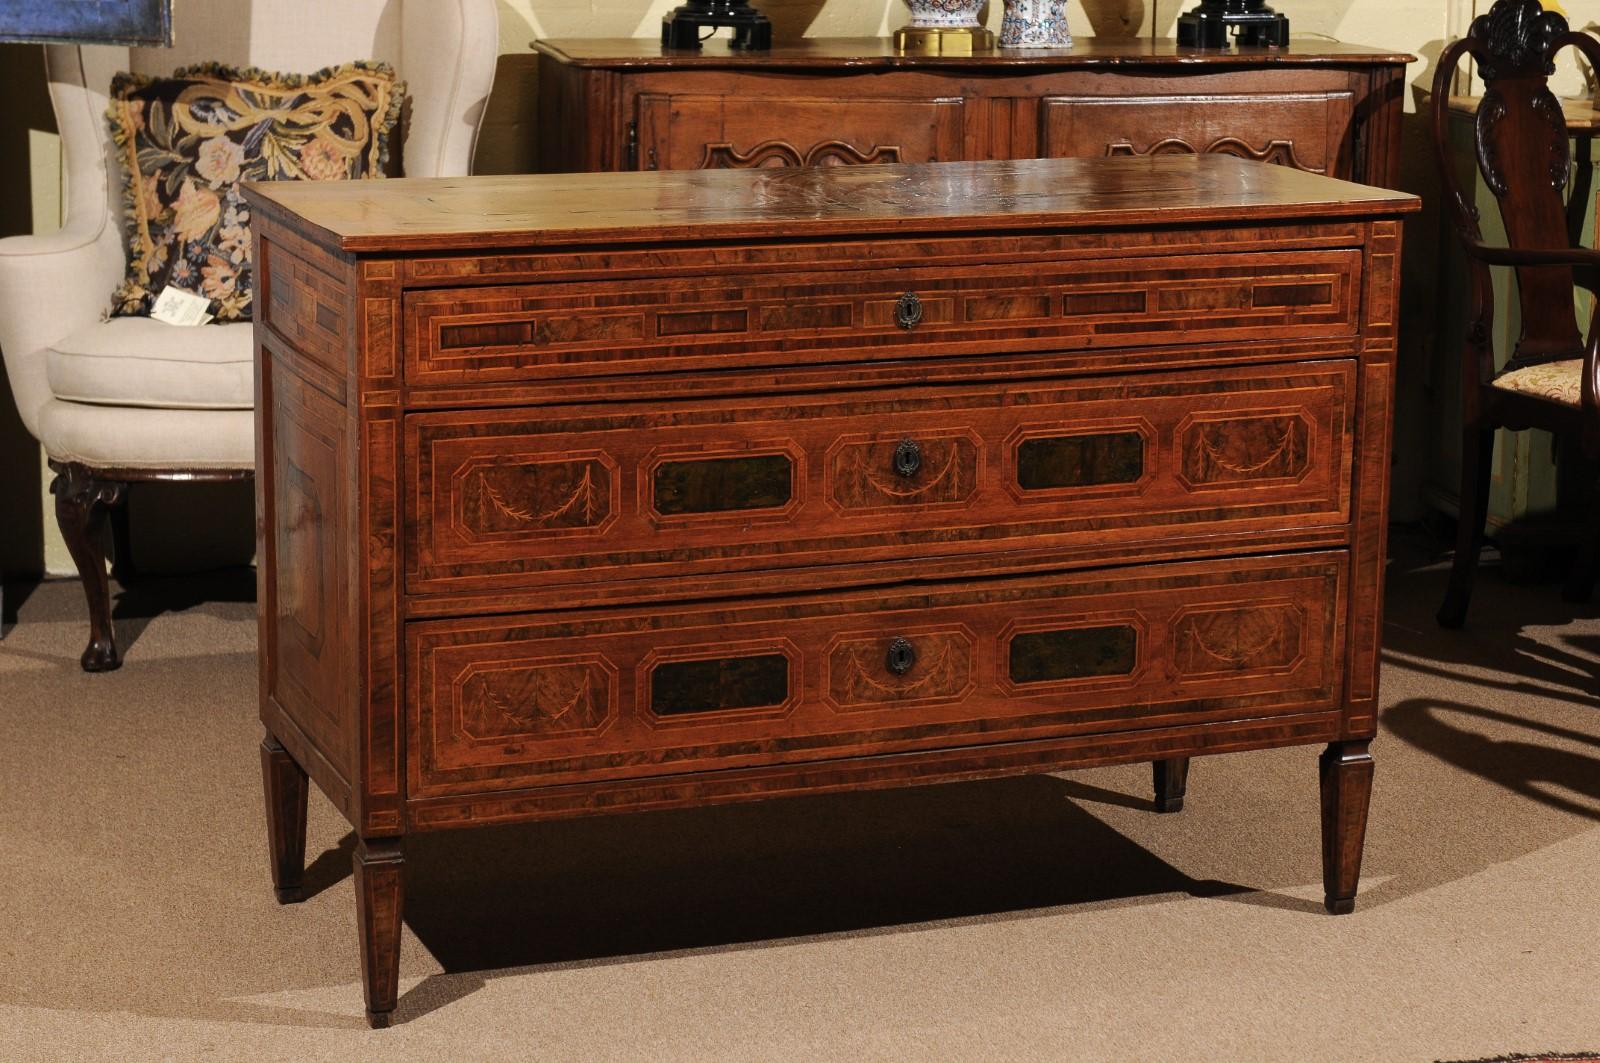 The neoclassical commode constructed in walnut features beautiful geometric inlay with swag detail on the front and side panels. The commode has 3 drawers and rests on square tapered legs.